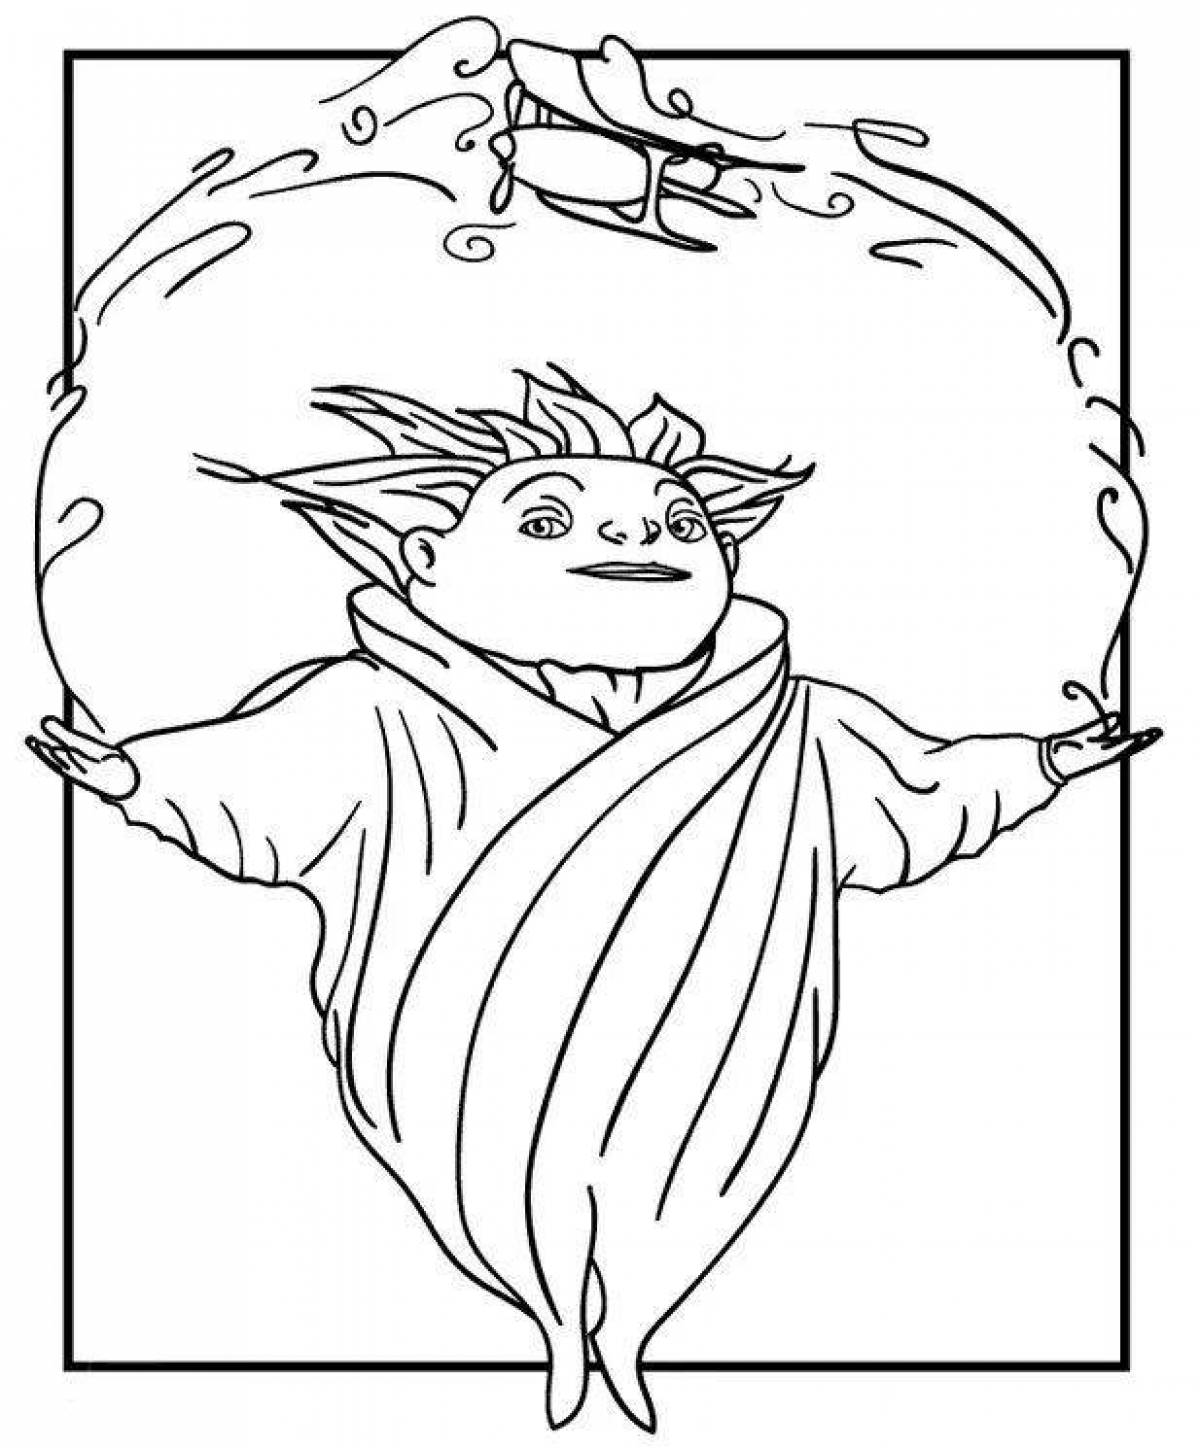 Rise of the Guardians impressive coloring book